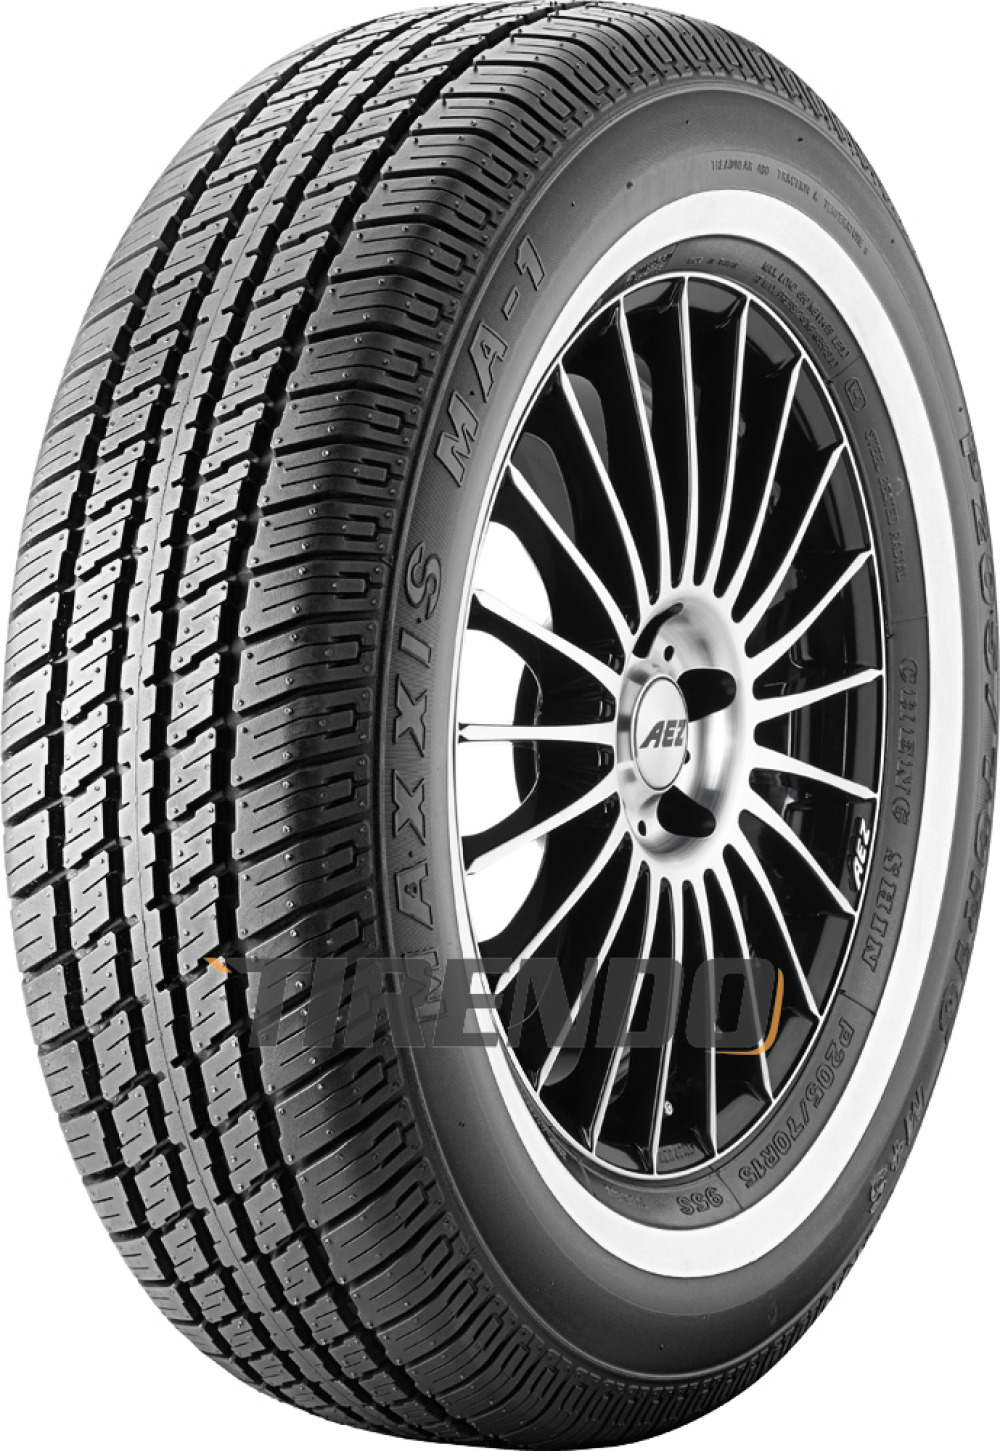 Image of Maxxis MA 1 ( P155/80 R13 79S WSW 15mm )